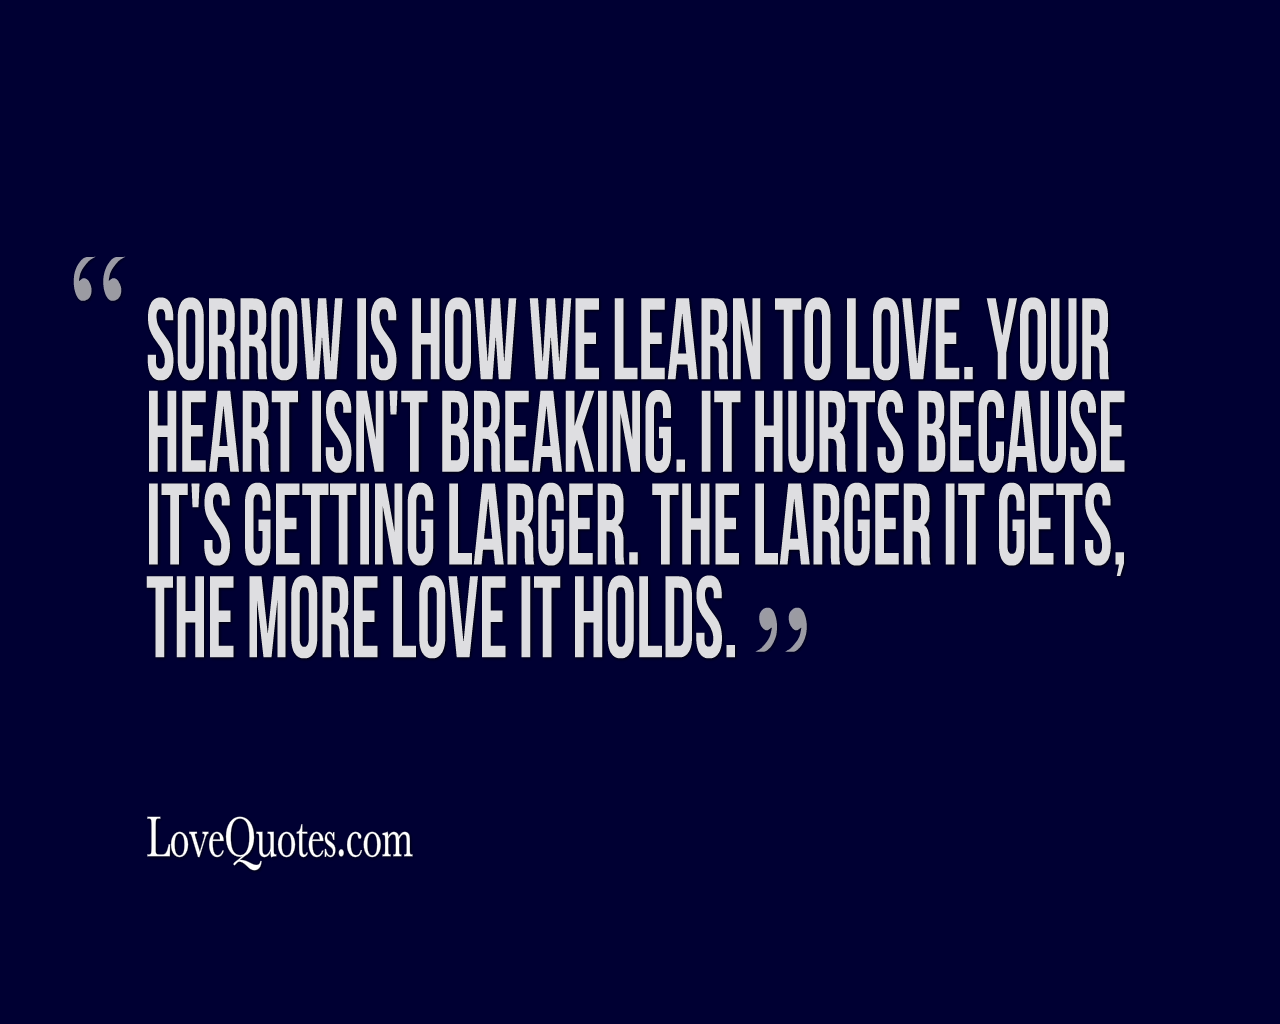 How We Learn To Love